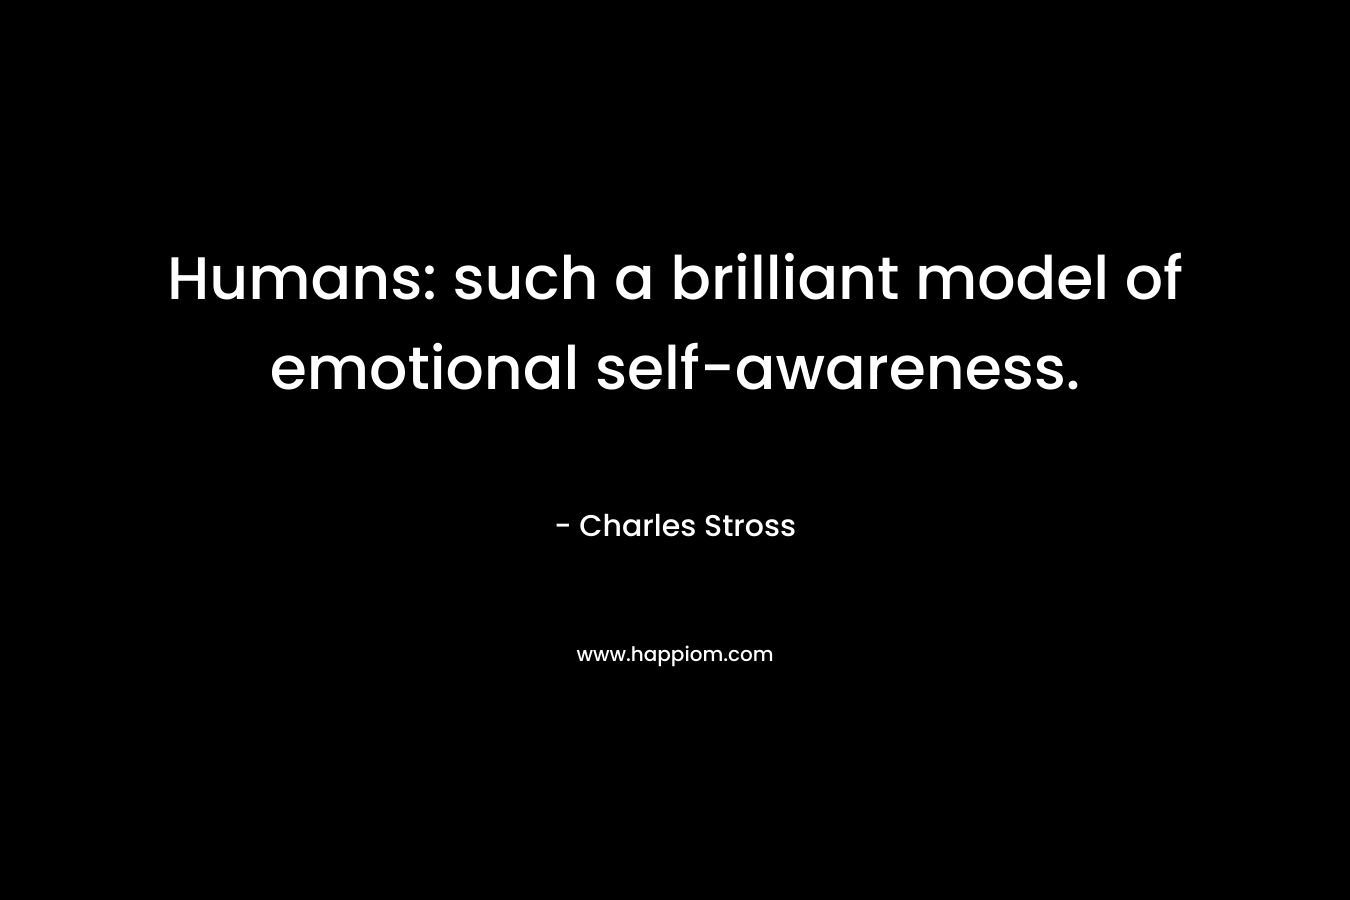 Humans: such a brilliant model of emotional self-awareness. – Charles Stross